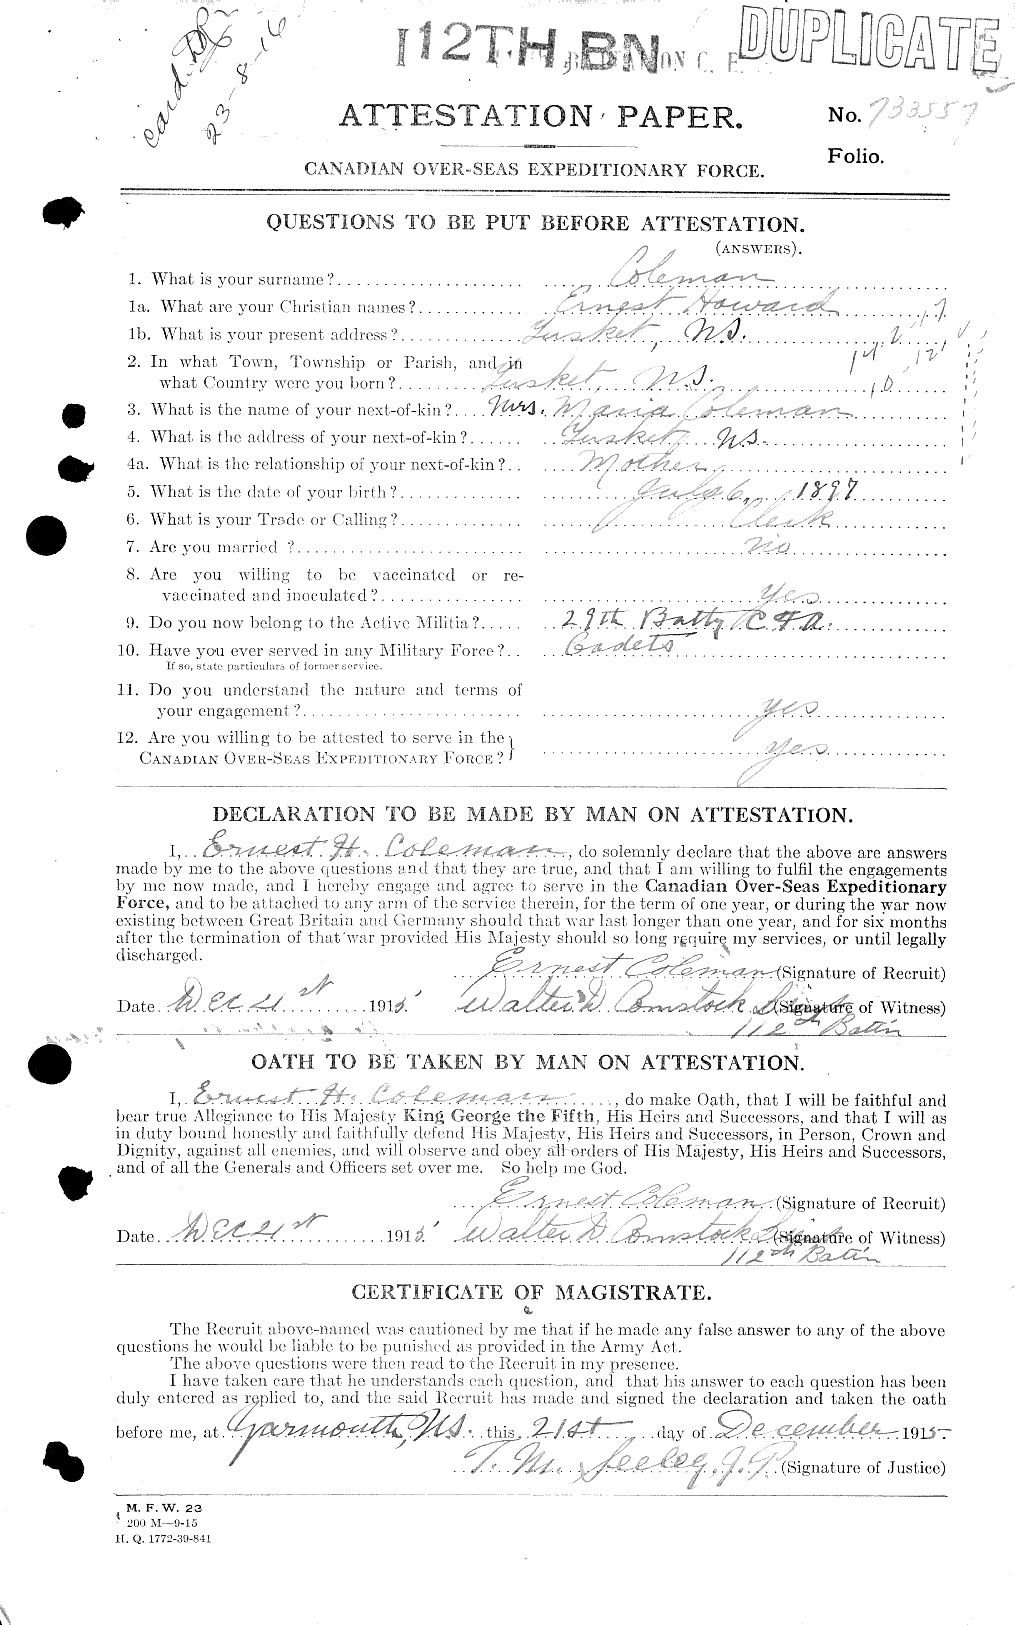 Personnel Records of the First World War - CEF 028119a